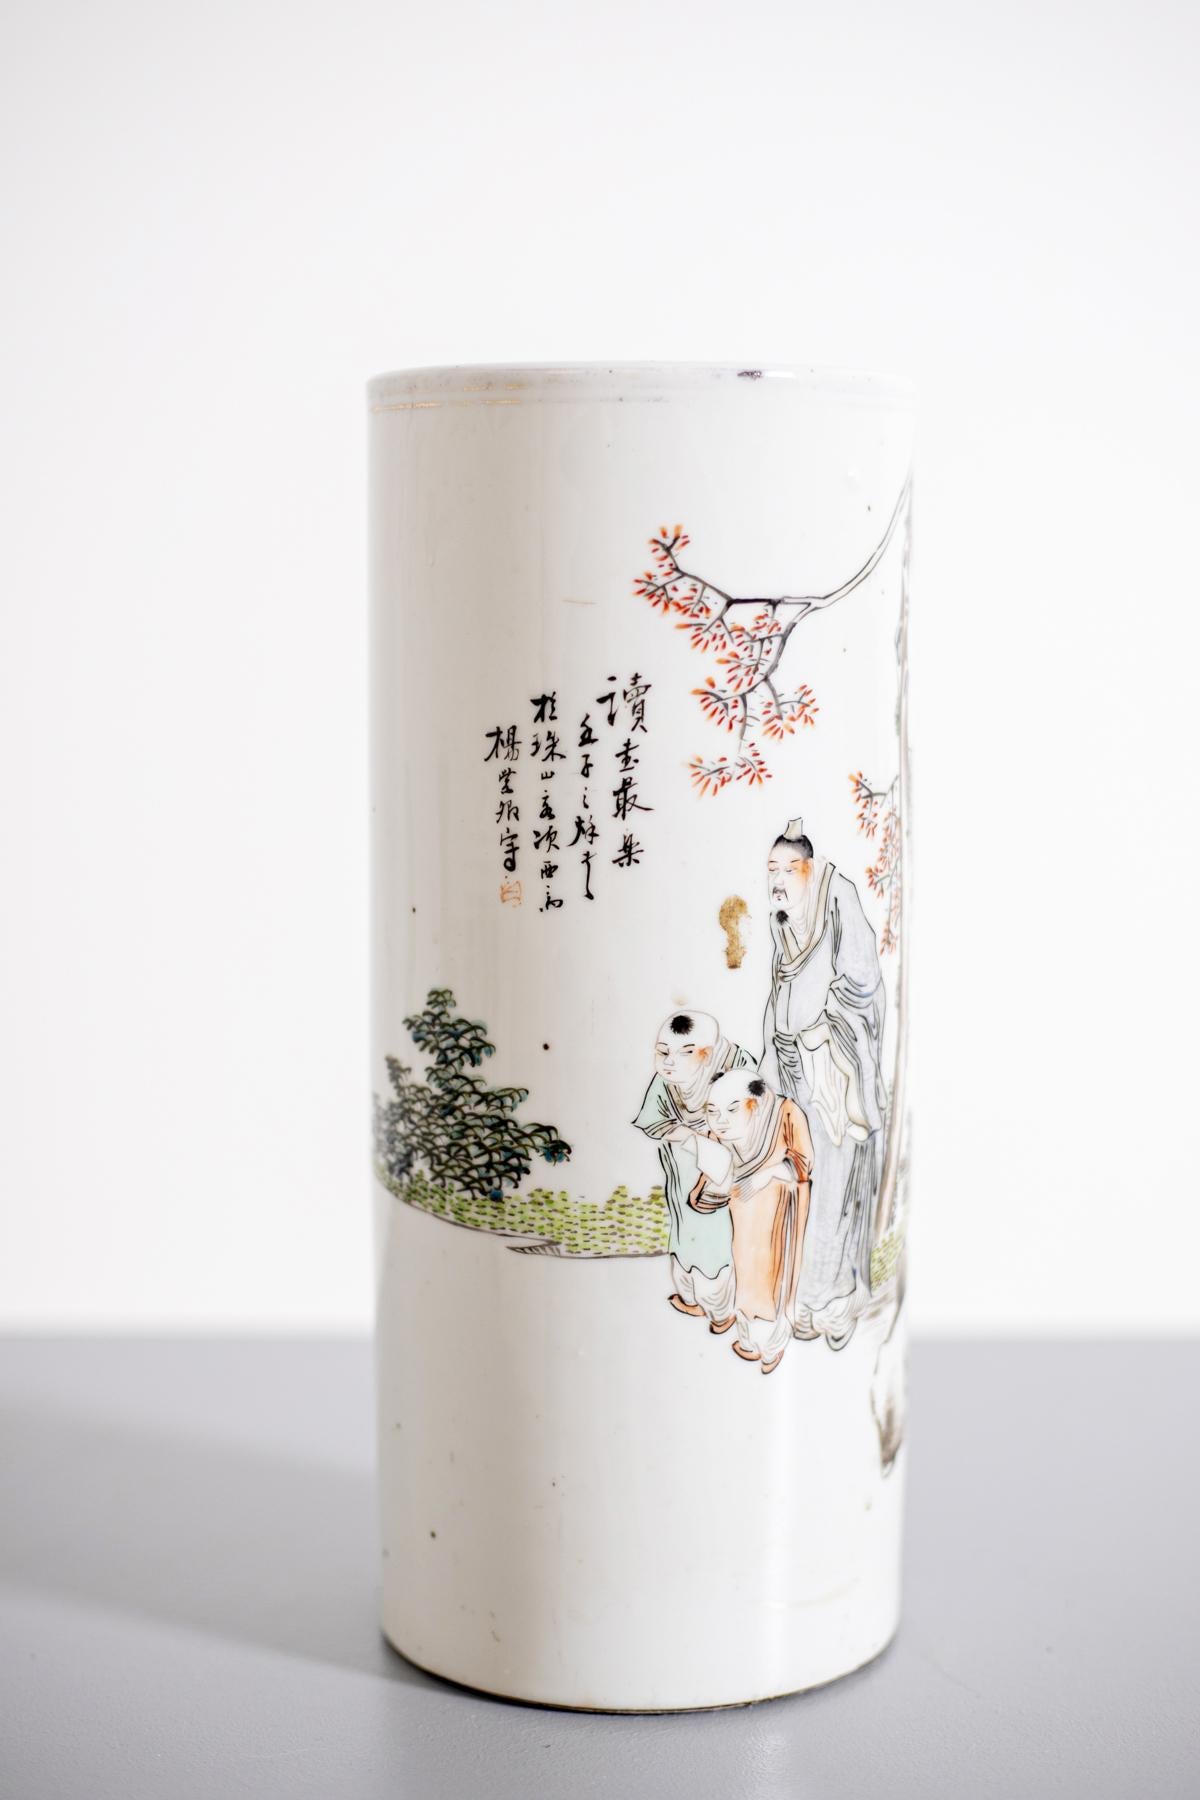 Porcelain vase, polychrome Chinese decoration with characters and ideograms. This vase was created at the end of the 19th century, made entirely of durable white porcelain, with decoration.
This vase depicts a teaching scene: a taller figure stands